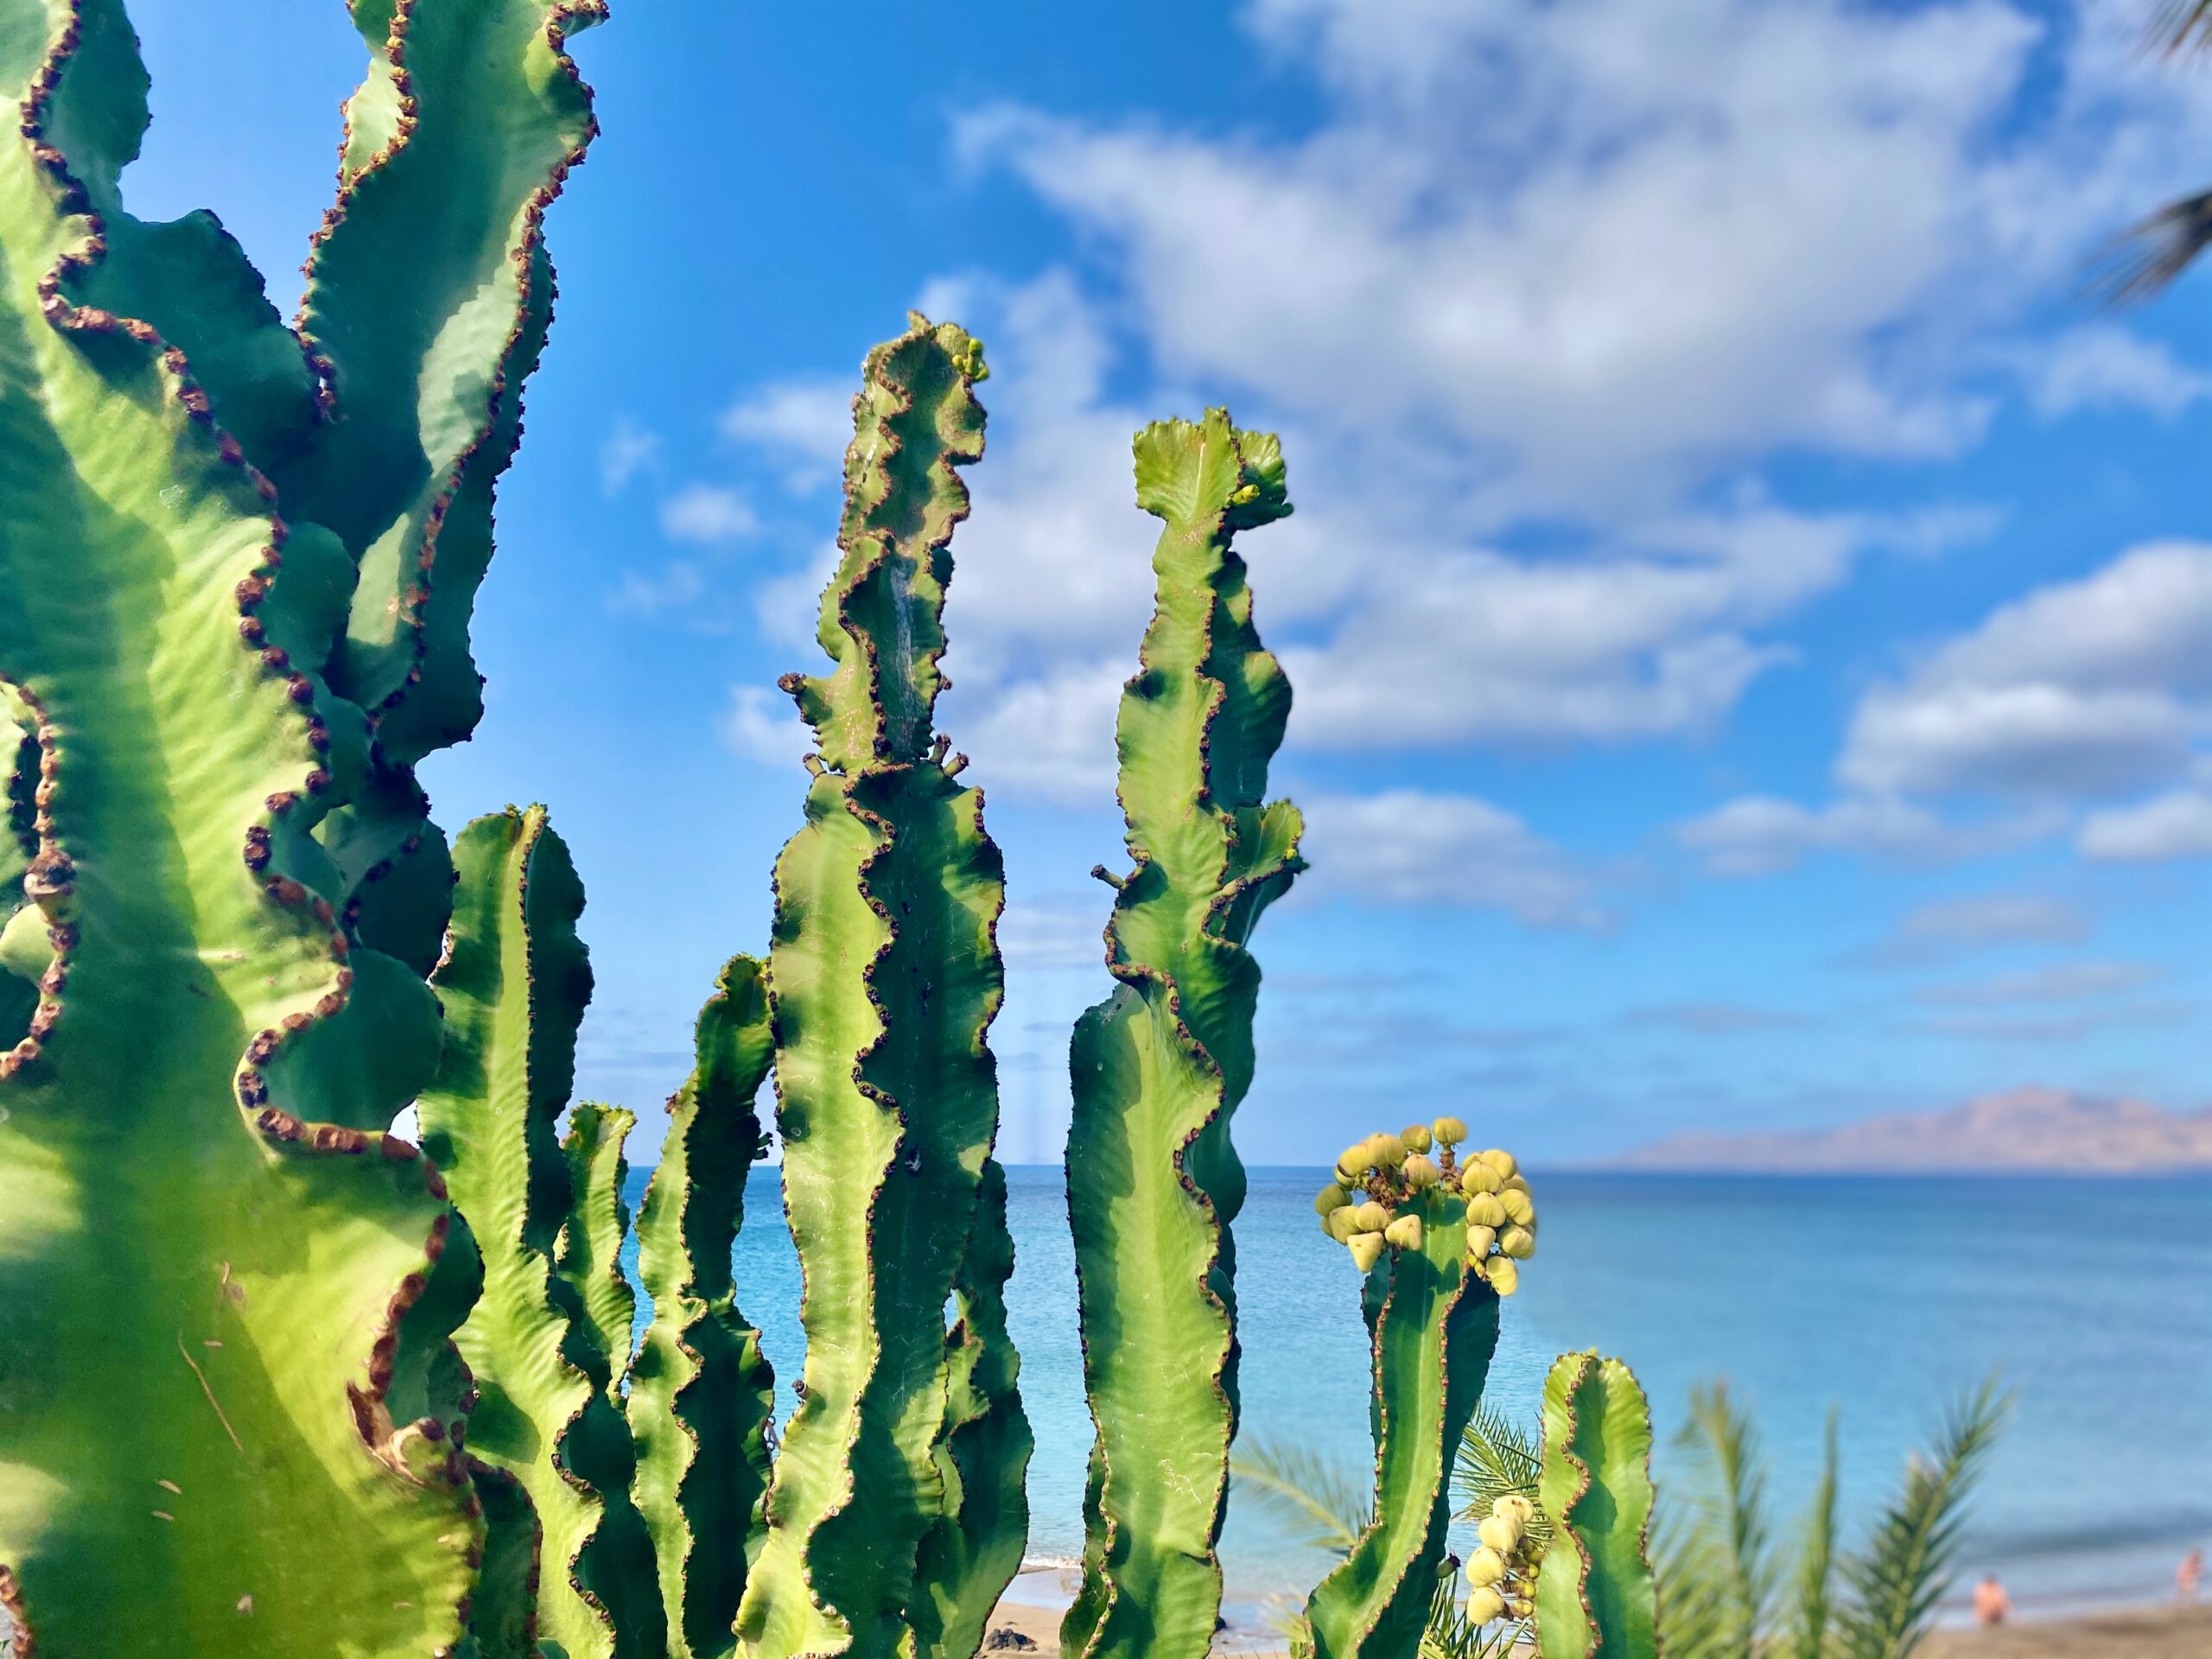 Cactus Meaning And Symbolism